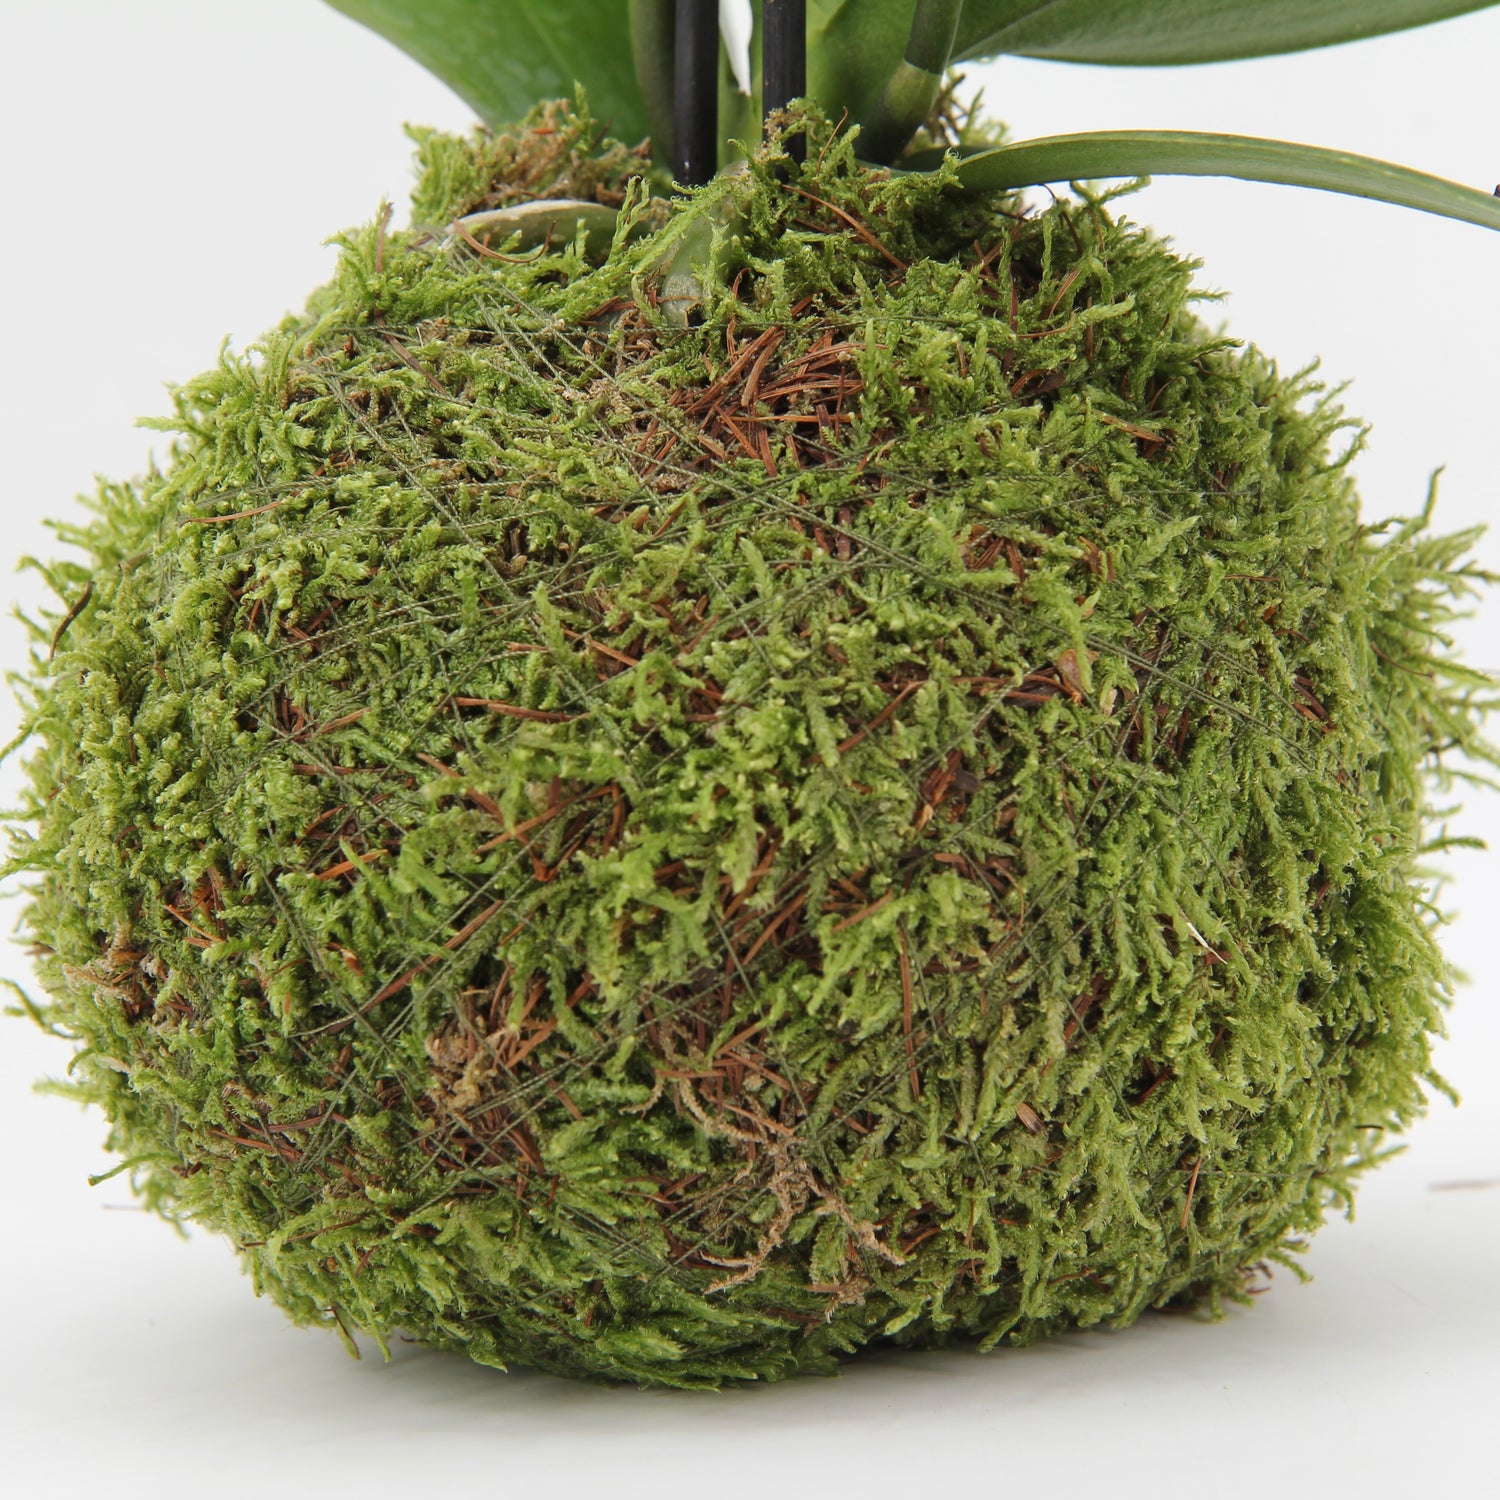 moss earth natural moss garden. Moss kokedama plant wrapped in live moss